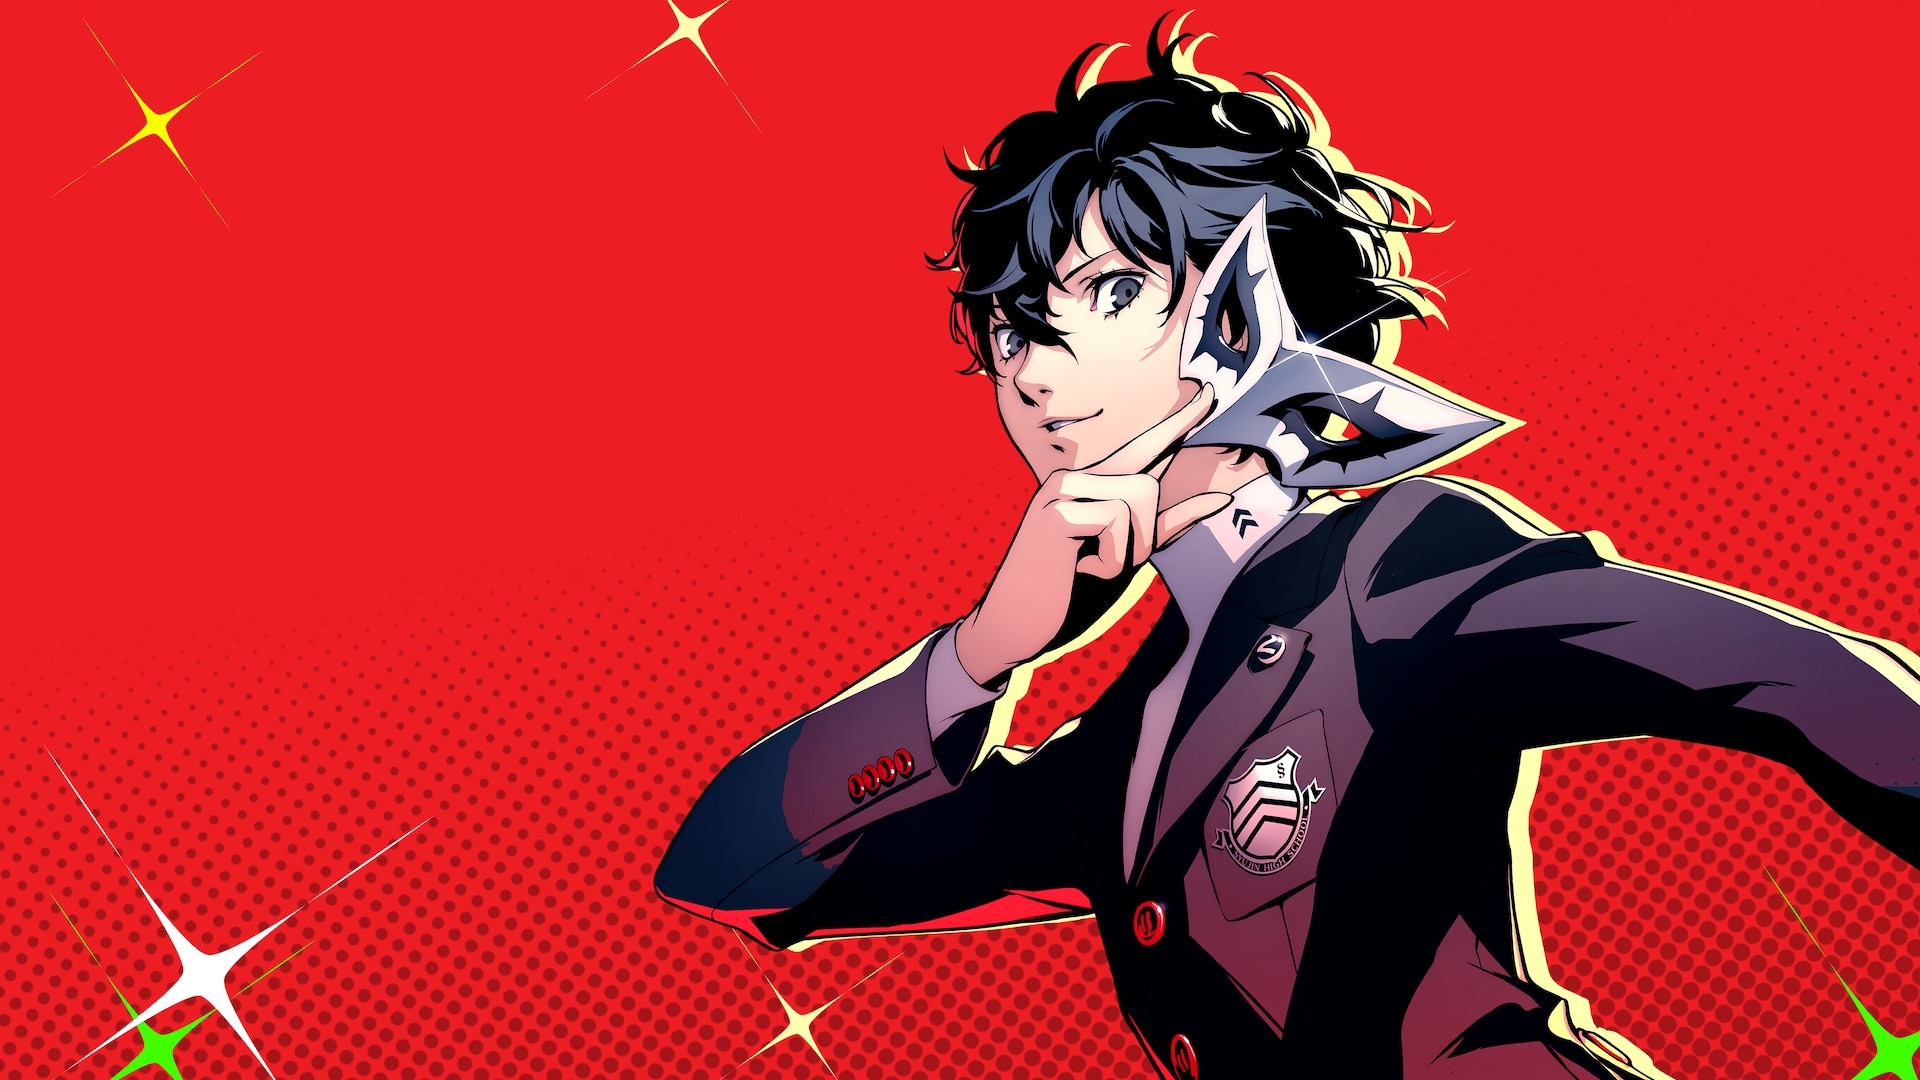 3840x Persona 5 Royal Game 3840x Resolution Wallpaper Hd Games 4k Wallpapers Images Photos And Background Wallpapers Den